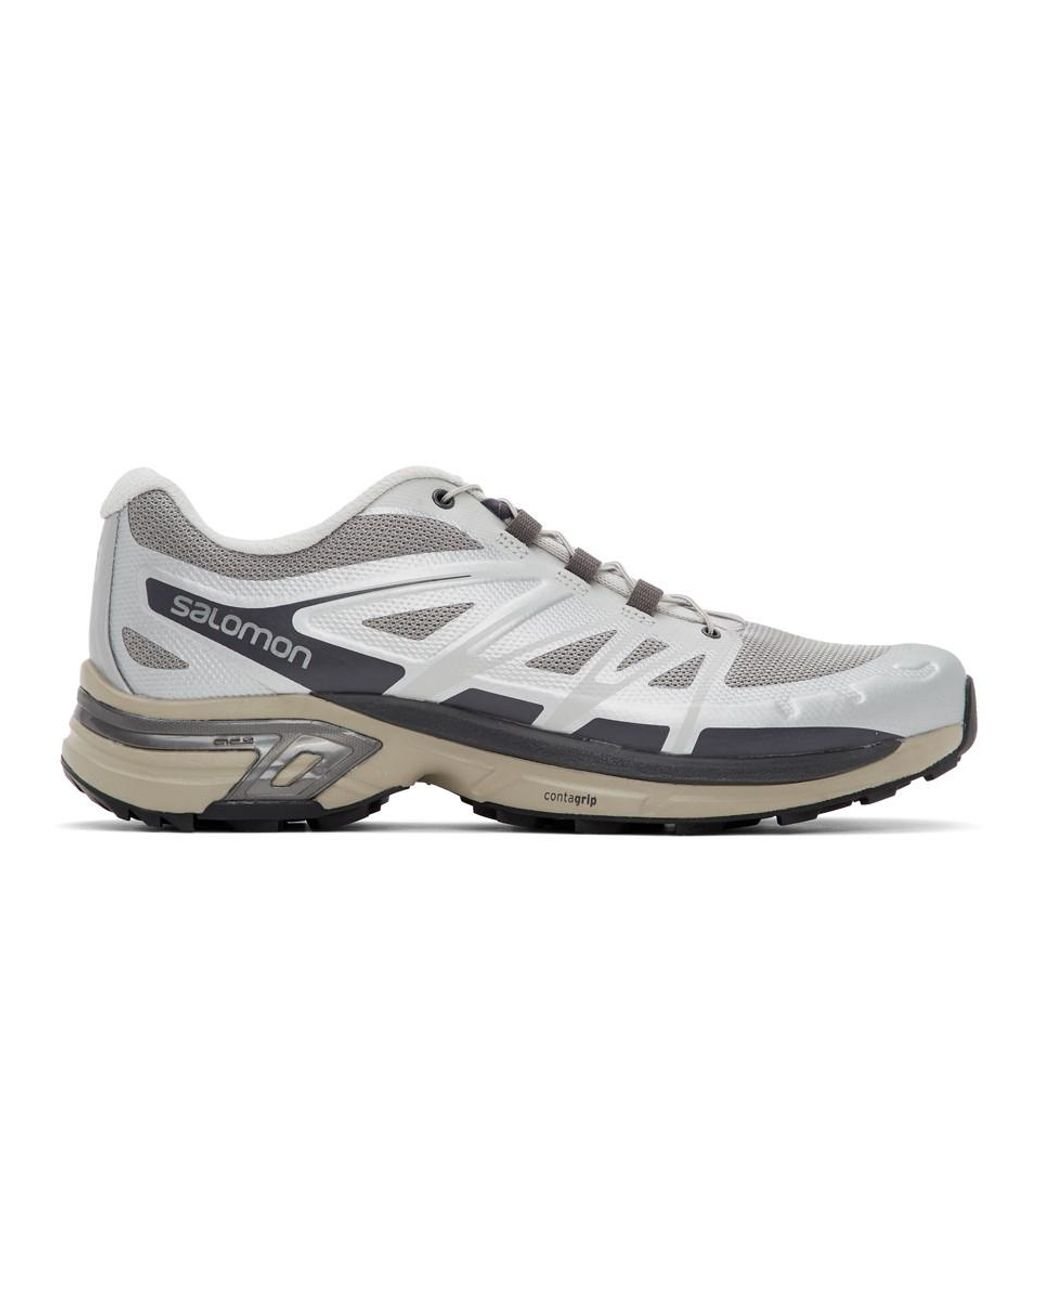 Salomon Silver Limited Edition Xt-wings 2 Adv Sneakers | Lyst Canada